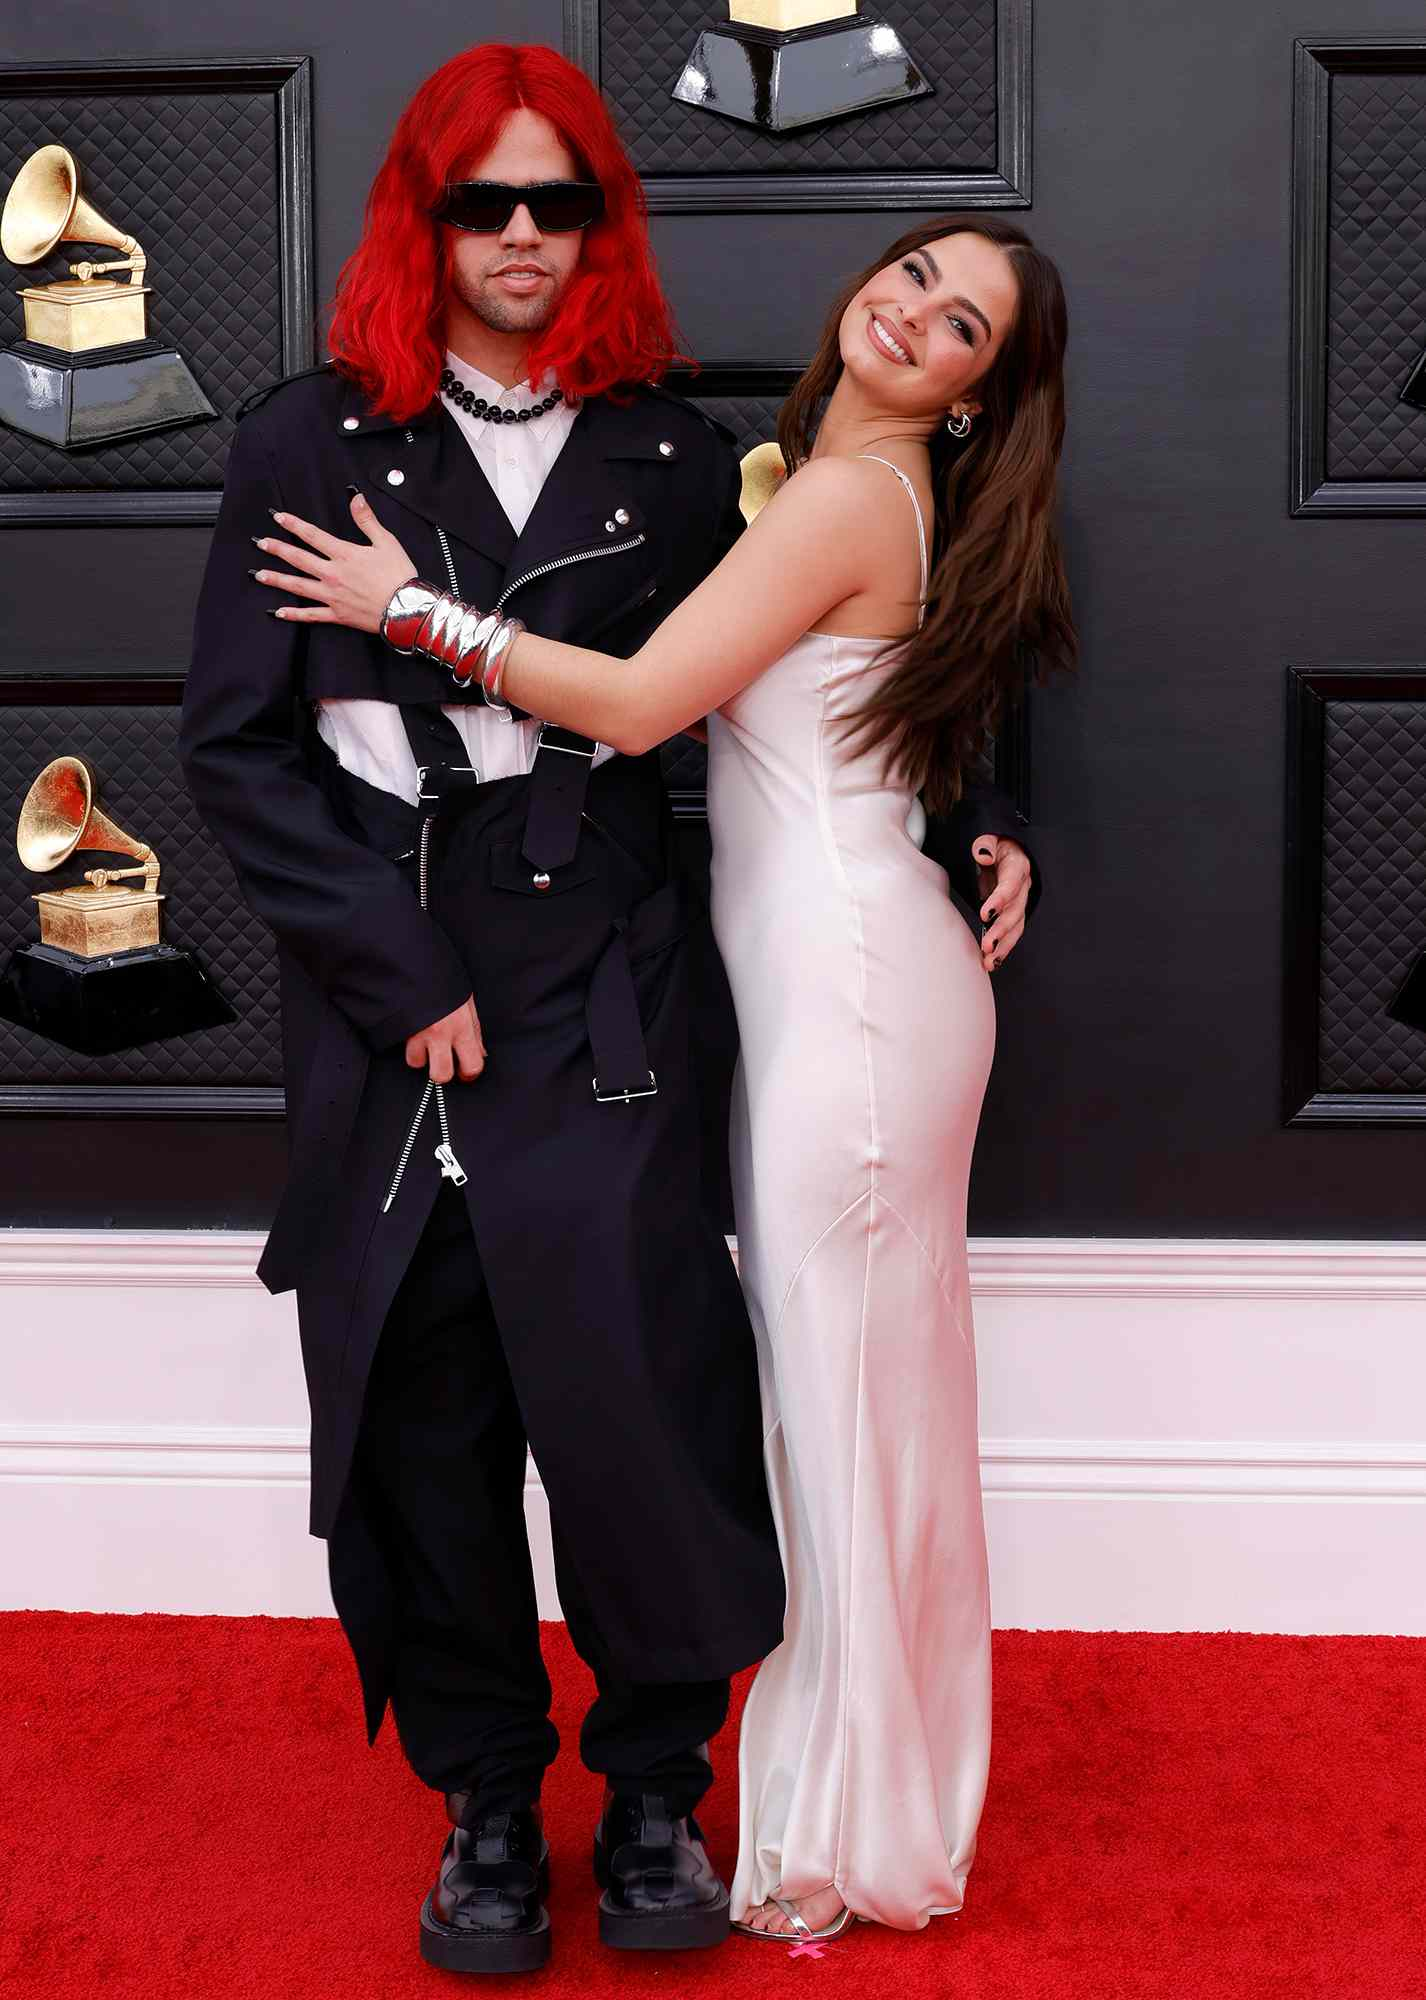 Addison Rae and Omer Fedi attended the Grammys Awards show together.